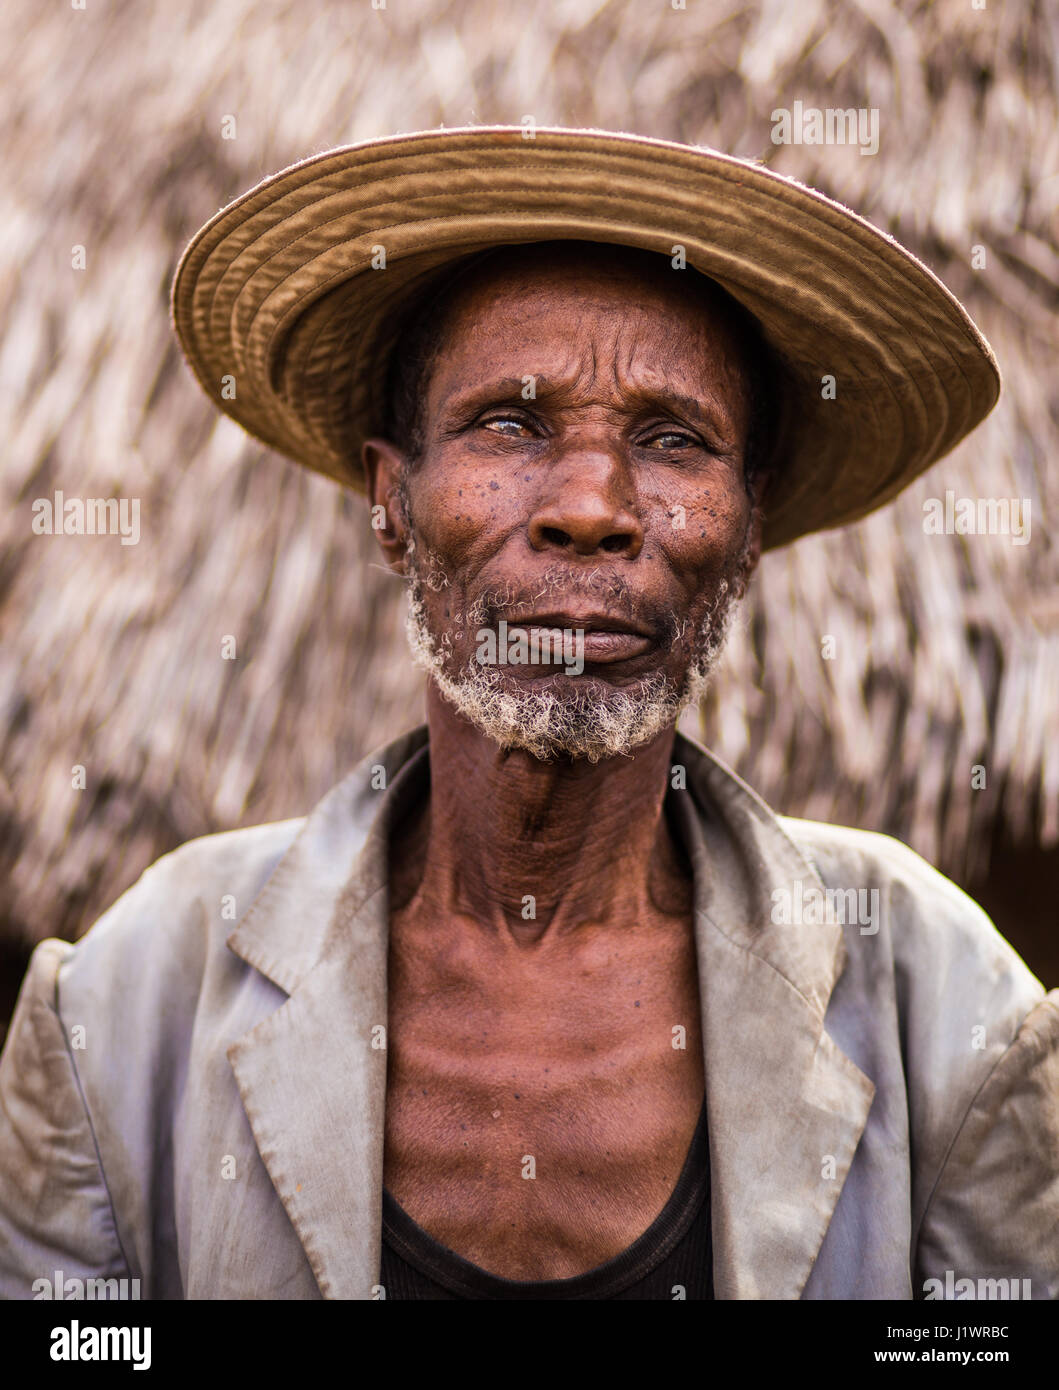 Portrait of a blind man from a bedick village in rural South Eastern Senegal Stock Photo